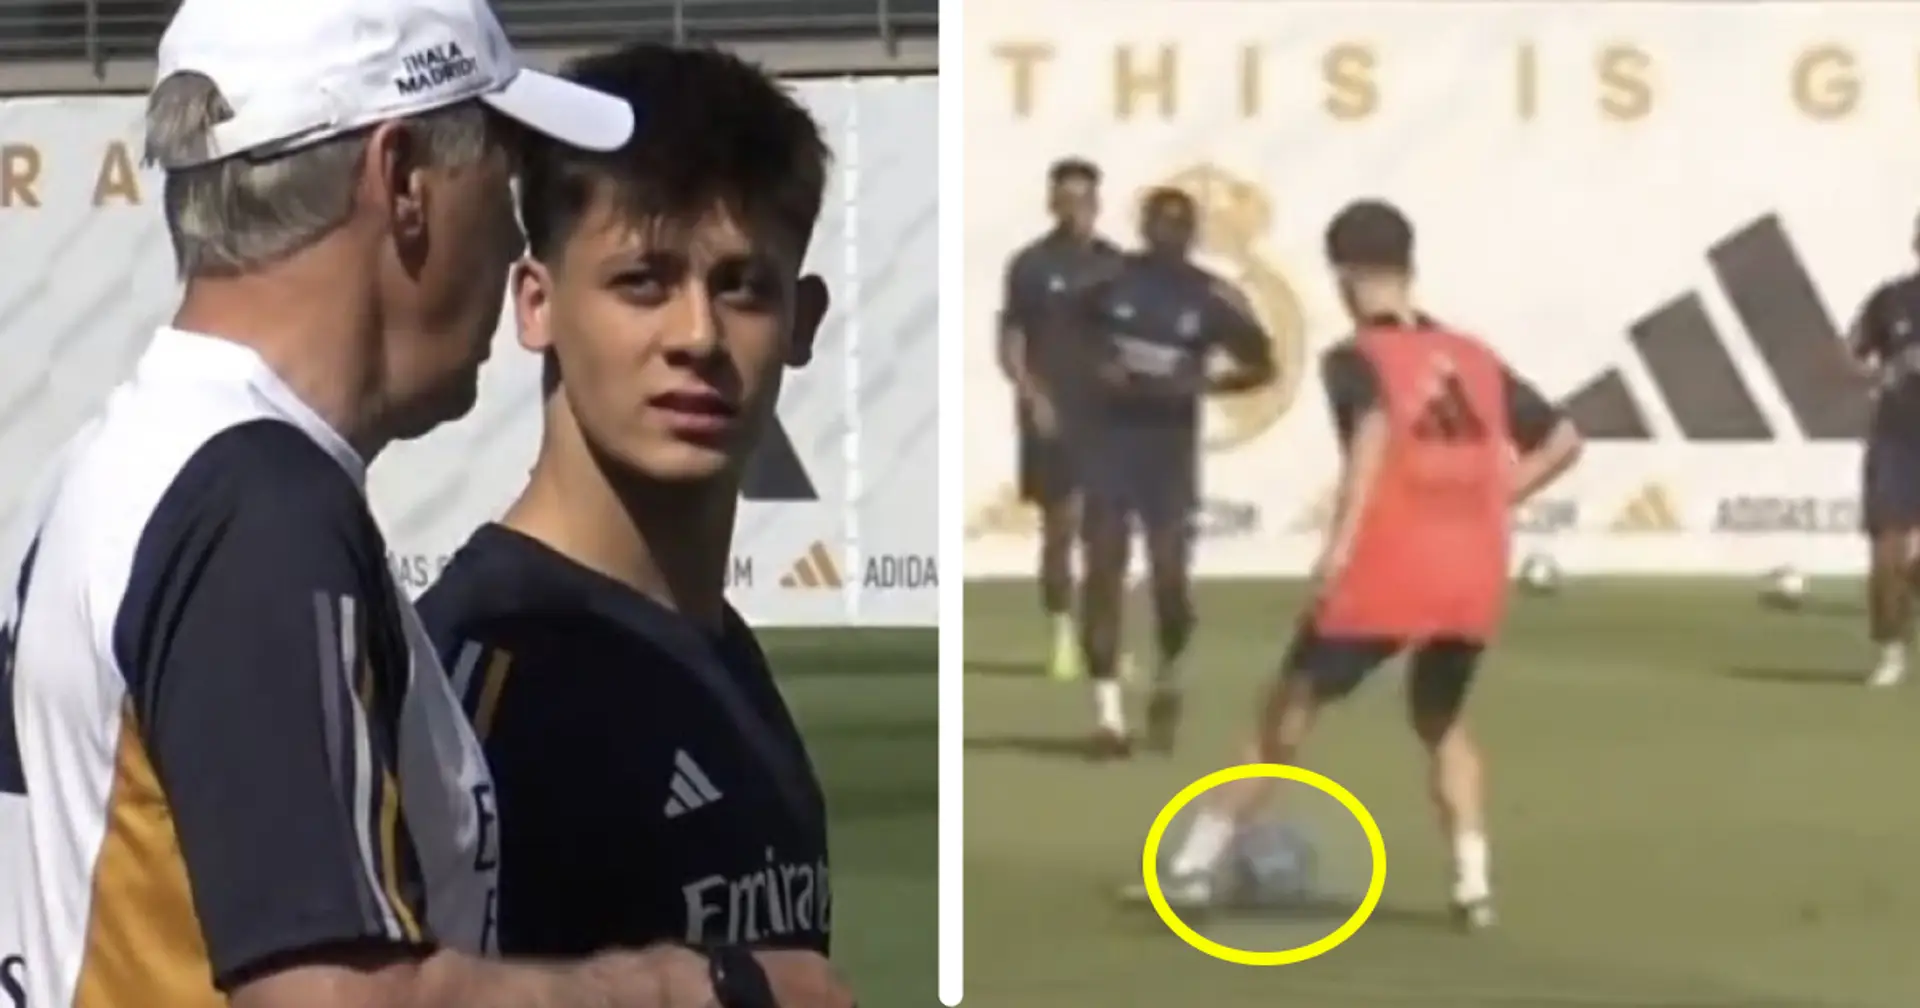 Arda Guler completes first Real Madrid training session, performs cheeky skill: 15 pics